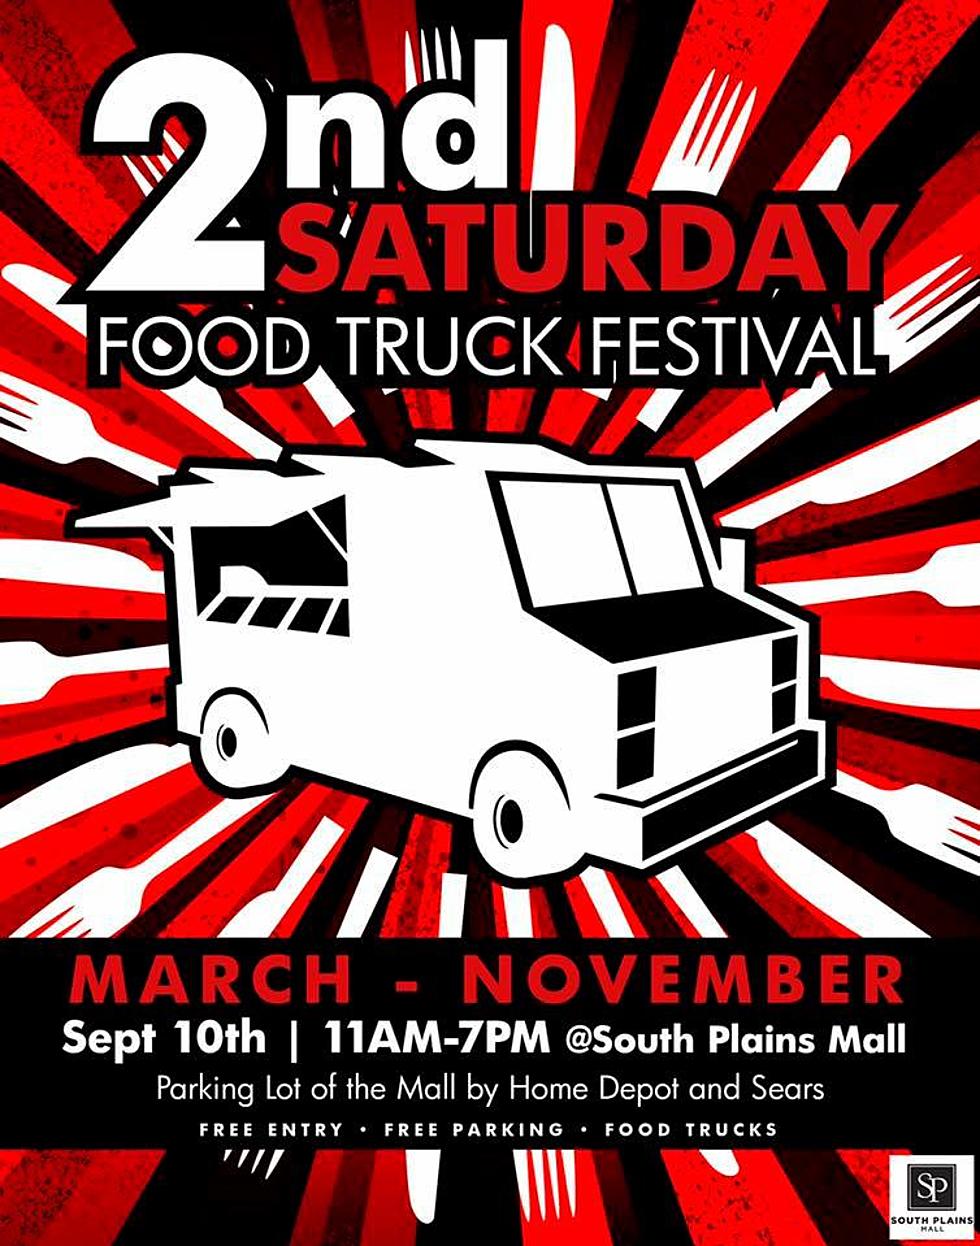 Second Saturday Food Truck Festival This Weekend